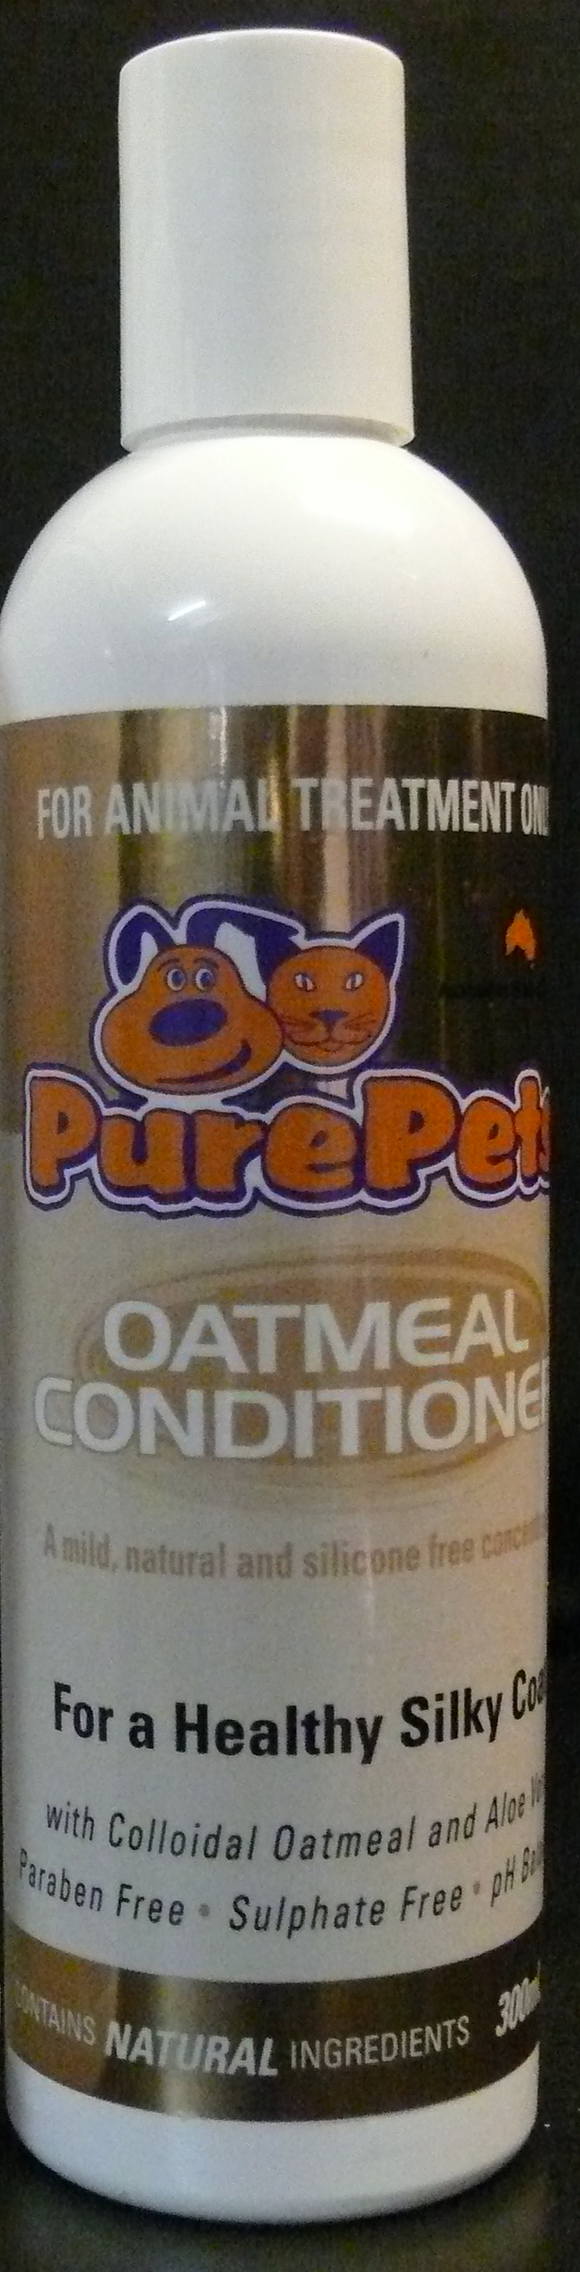 Purepets Oatmeal Concentrate Conditioner